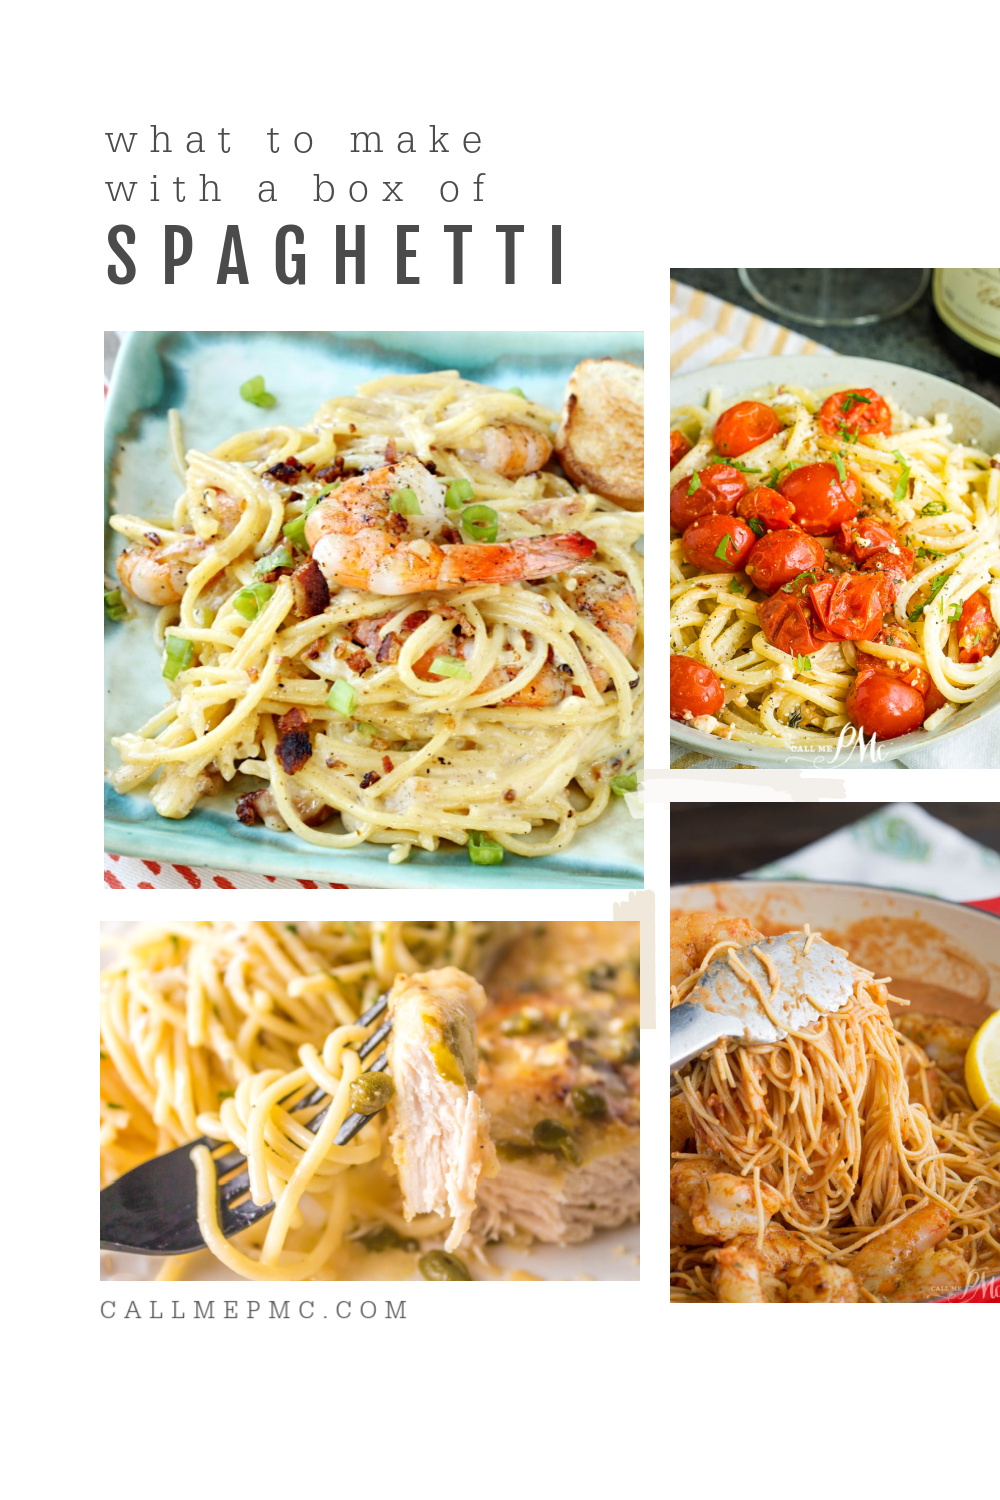 Recipes to make with a box of spaghetti